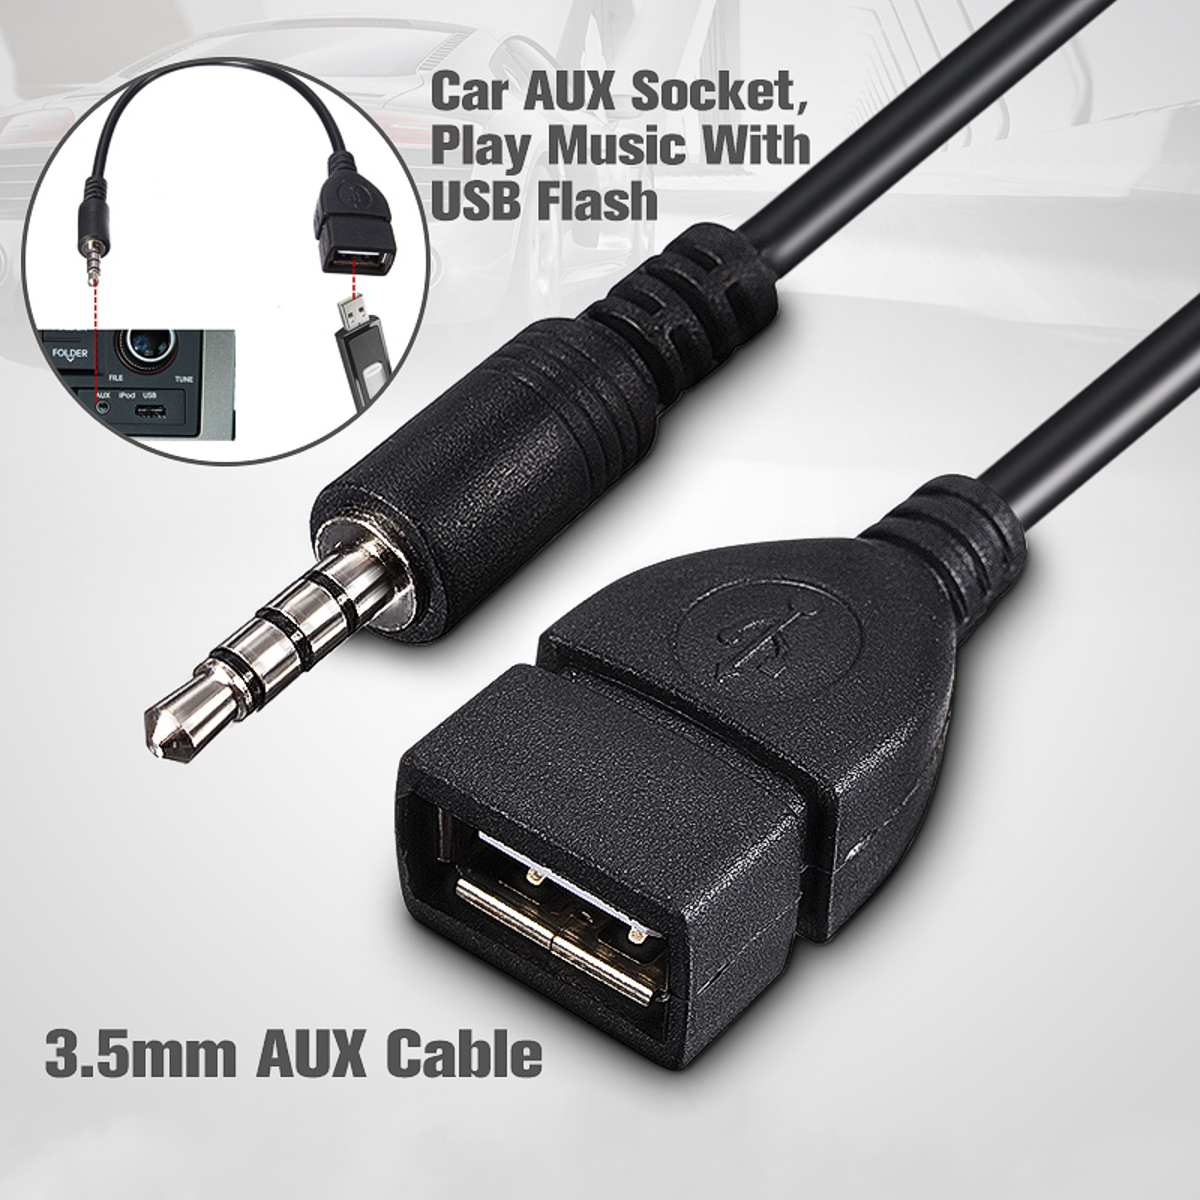 3.5mm male audio aux jack to usb 2.0 type a female converter adapter